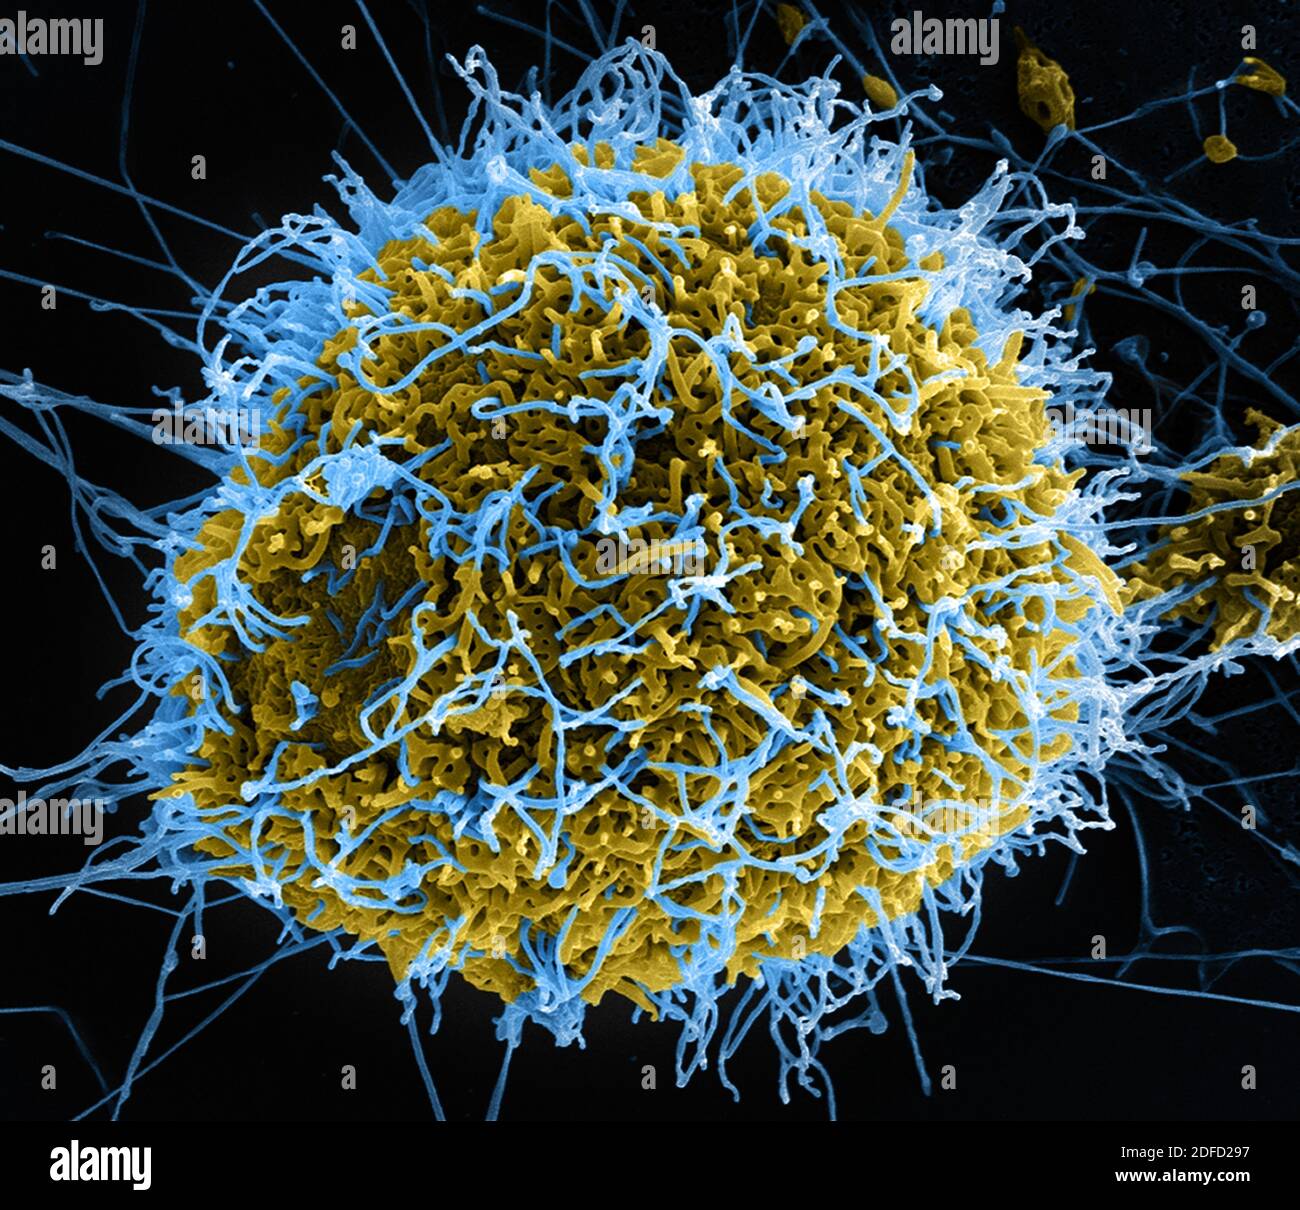 Colorized scanning electron micrograph of filamentous Ebola virus particles (blue) budding from a chronically infected VERO E6 cell (yellow-green). Im Stock Photo